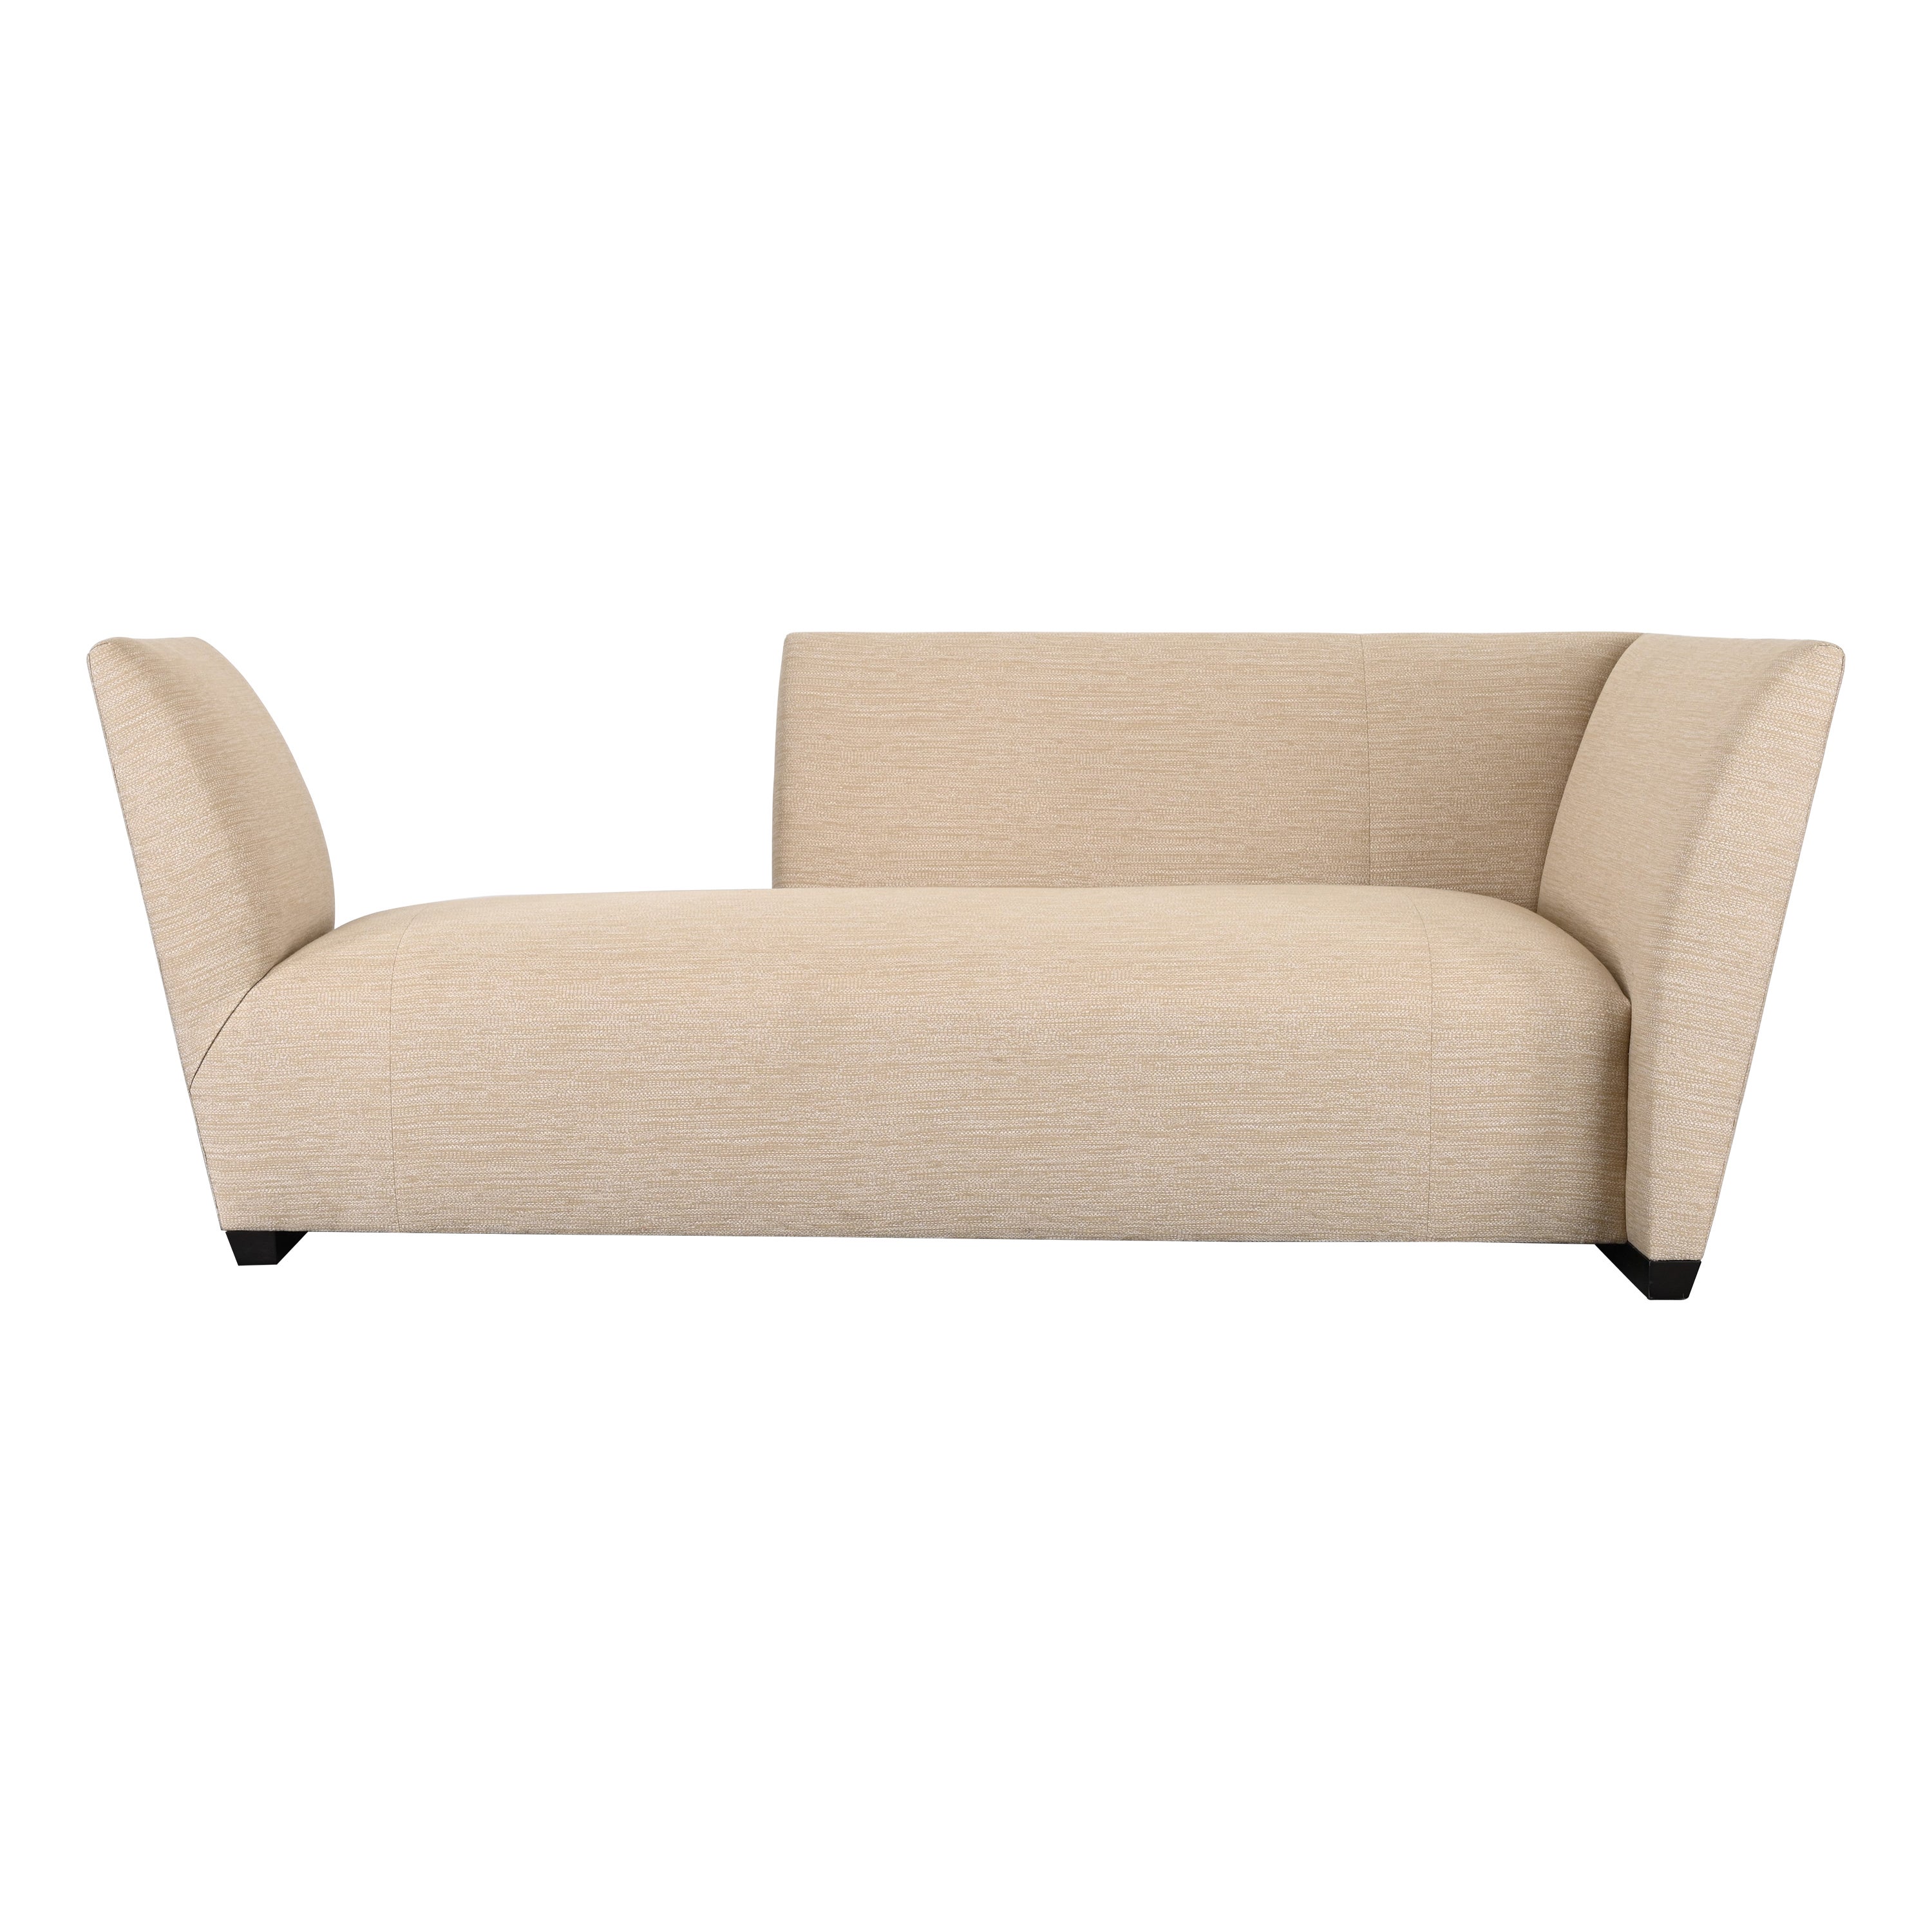 Island Sofa or Chaise Lounge by Joe D'Urso for Donghia, 1990s